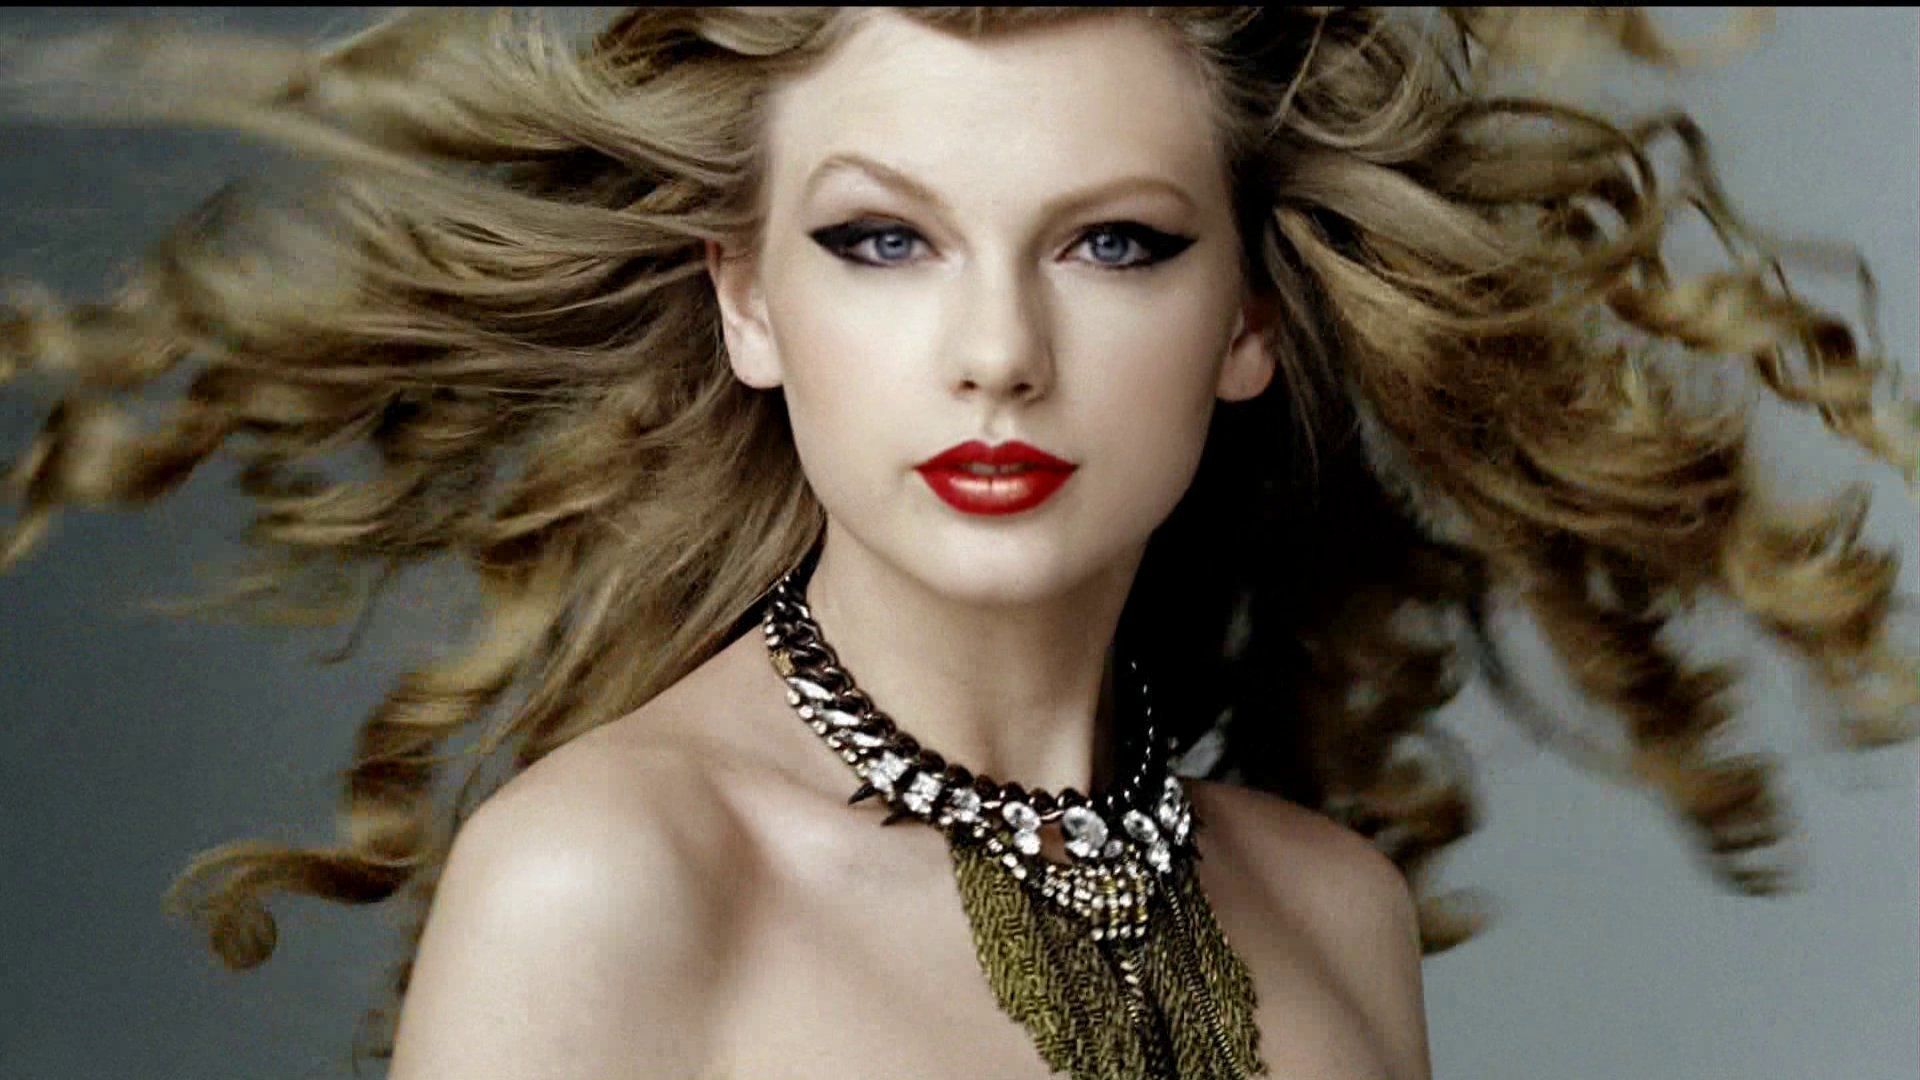 Taylor Swift Hd Wallpapers 18 | Free High Definition Unique Hd ...